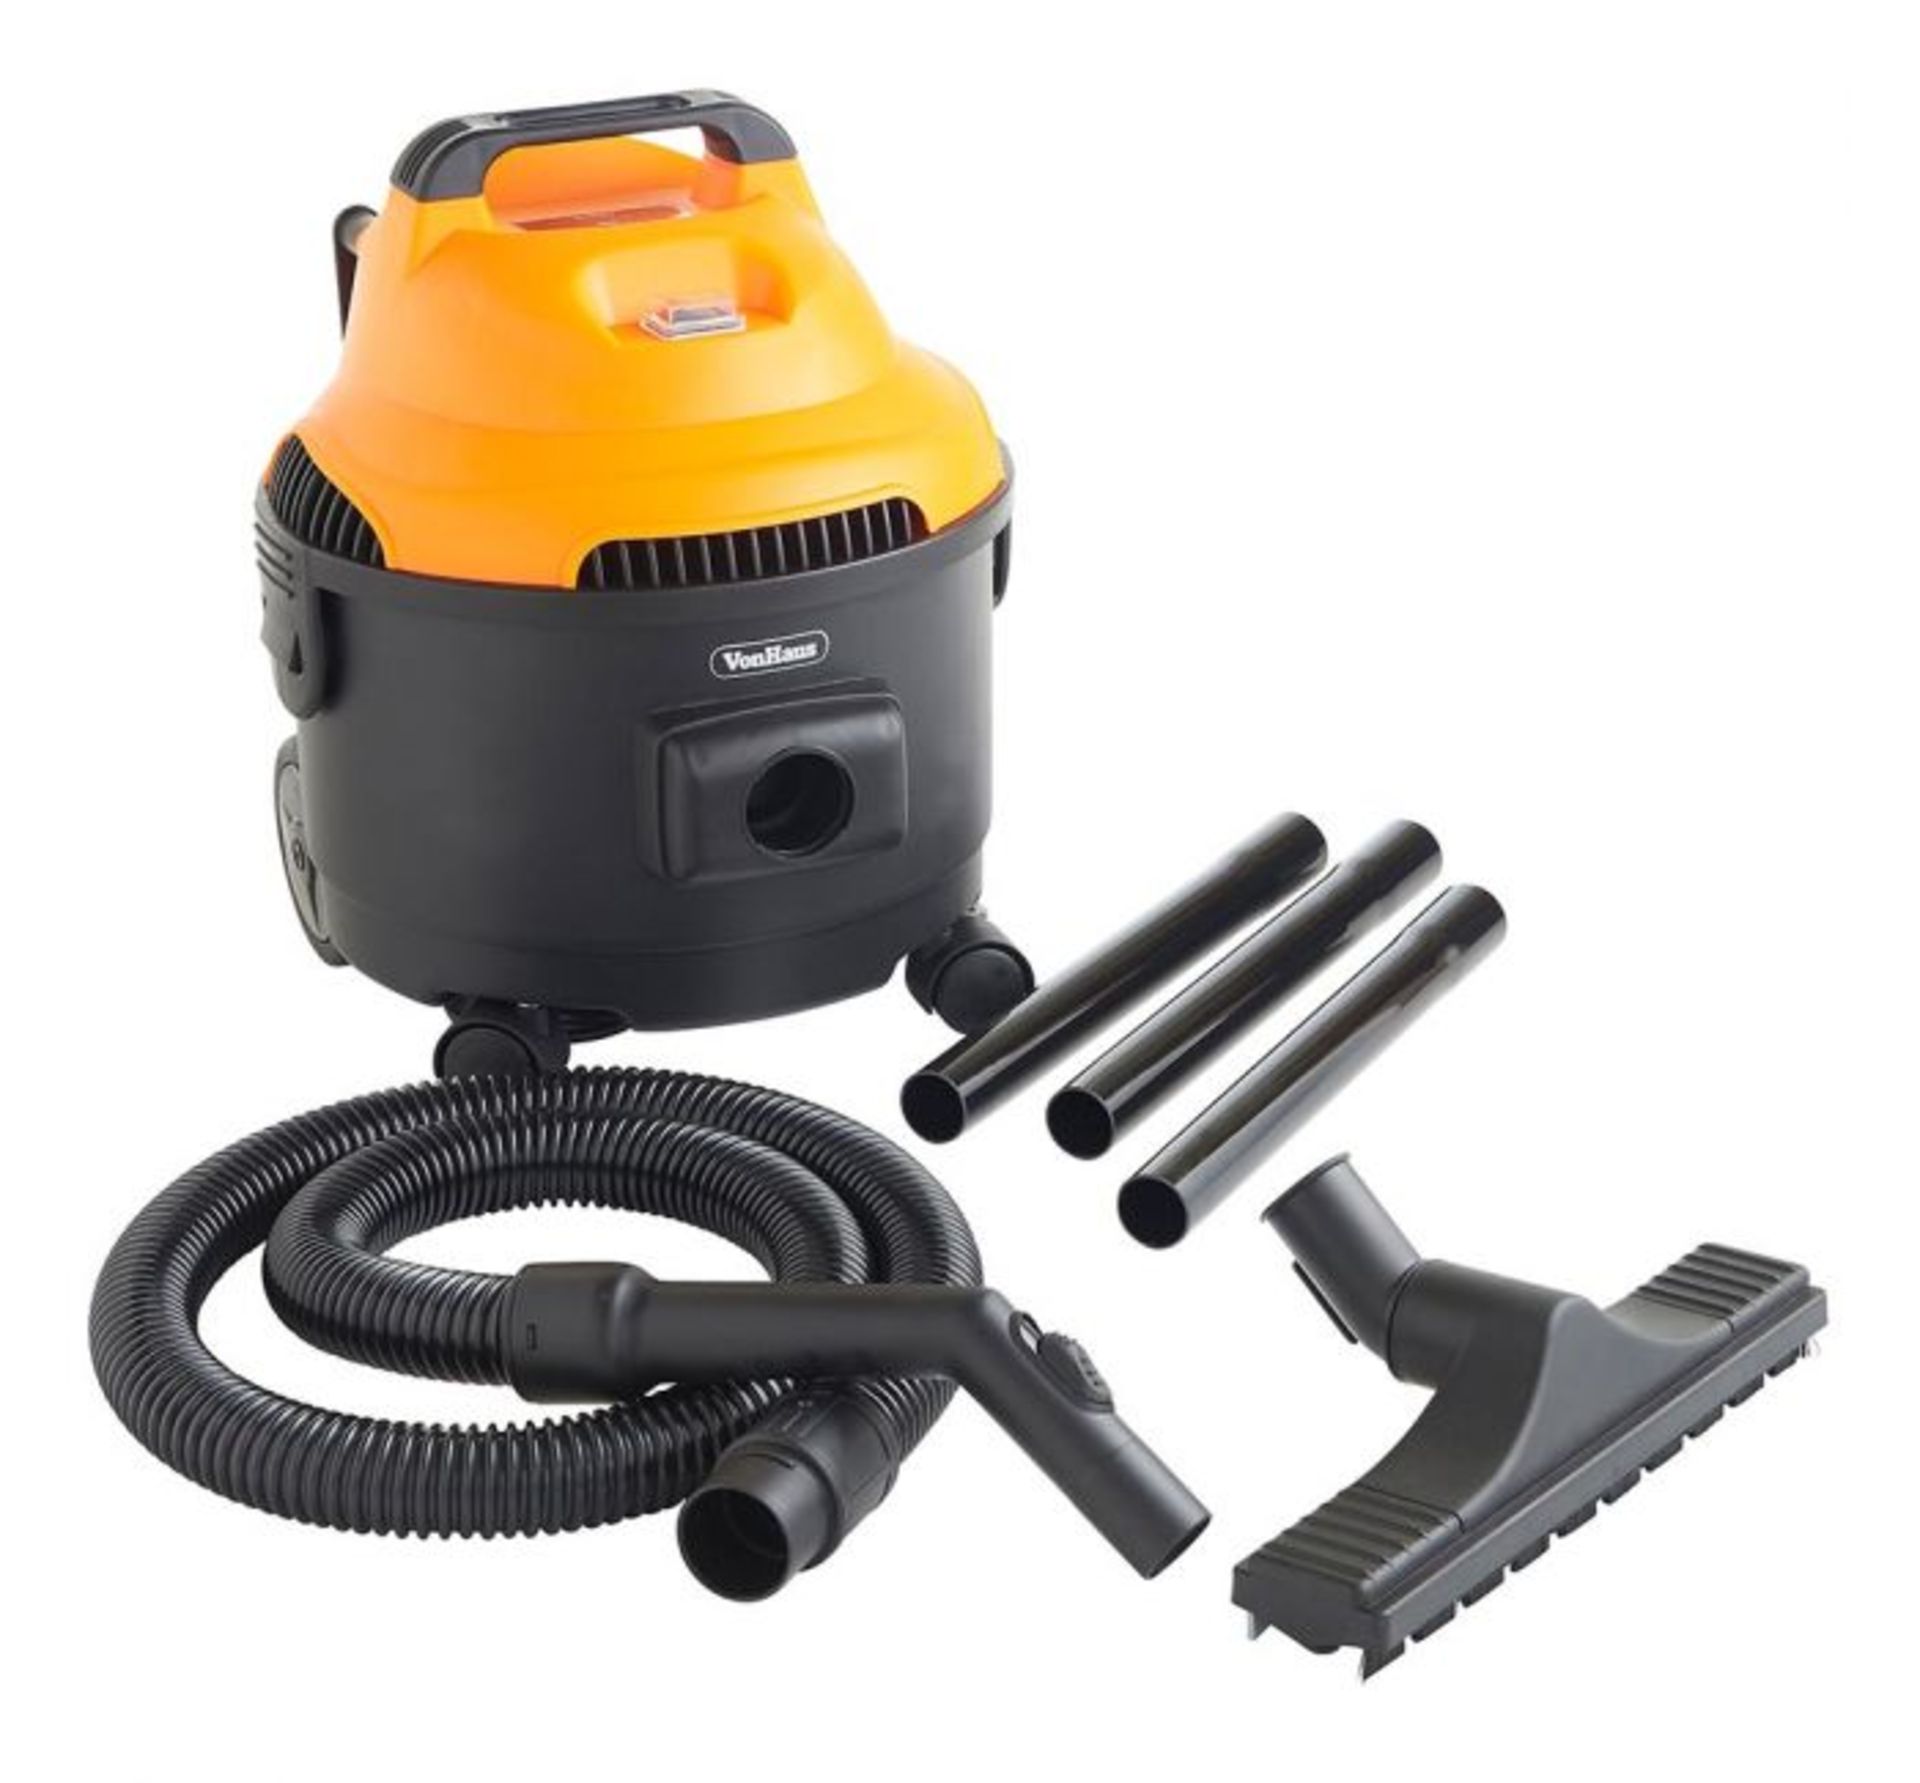 (MY78) 15L Wet and Dry Vacuum Cleaner 1200W Powerful 1200W wet & dry vacuum with blowing funct... - Image 3 of 3